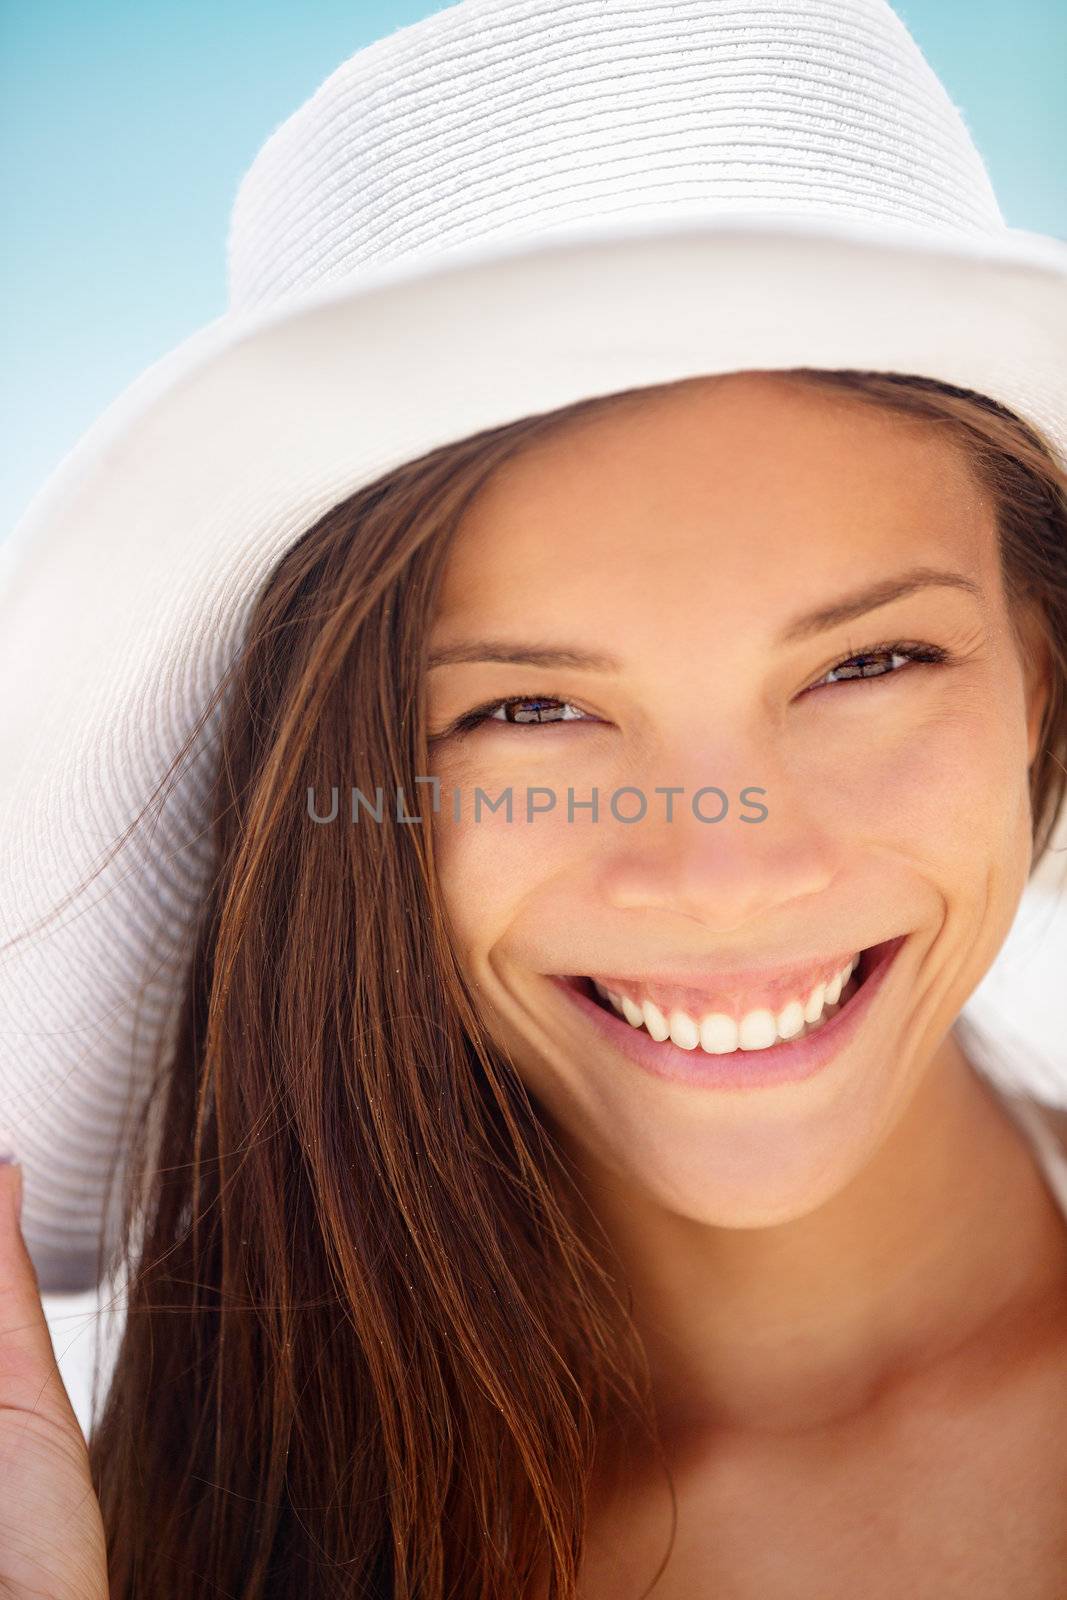 Beach woman smiling happy. Mixed race ethnic Asian and Caucasian young woman with candid fresh healthy smile outdoors wearing white beach hat.